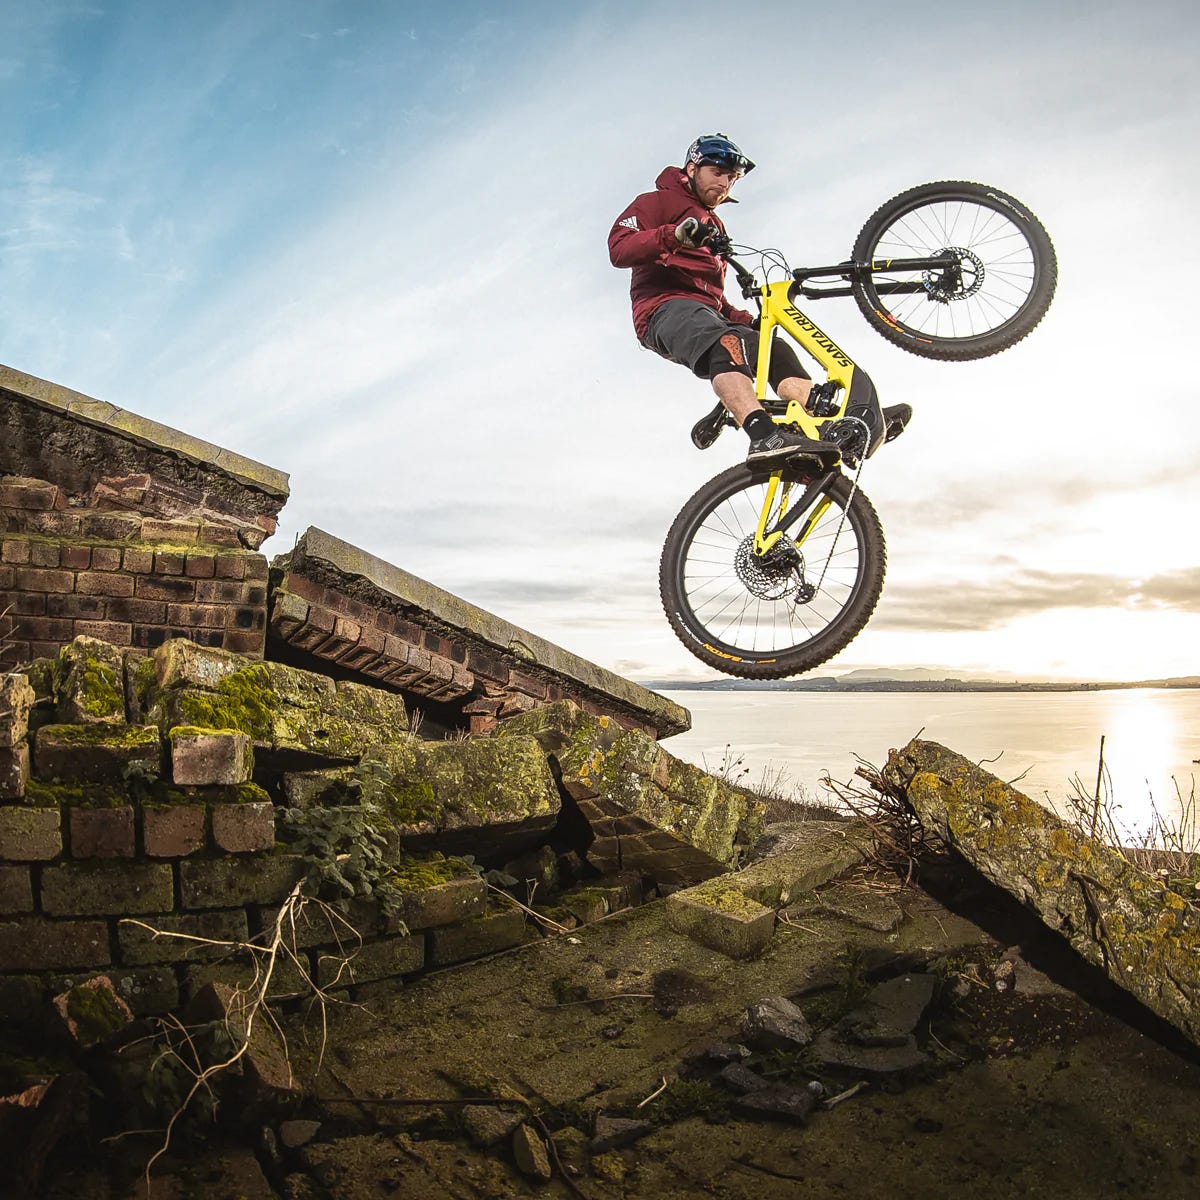 Danny MacAskill showing no fear and turning his failures into learning opportunities